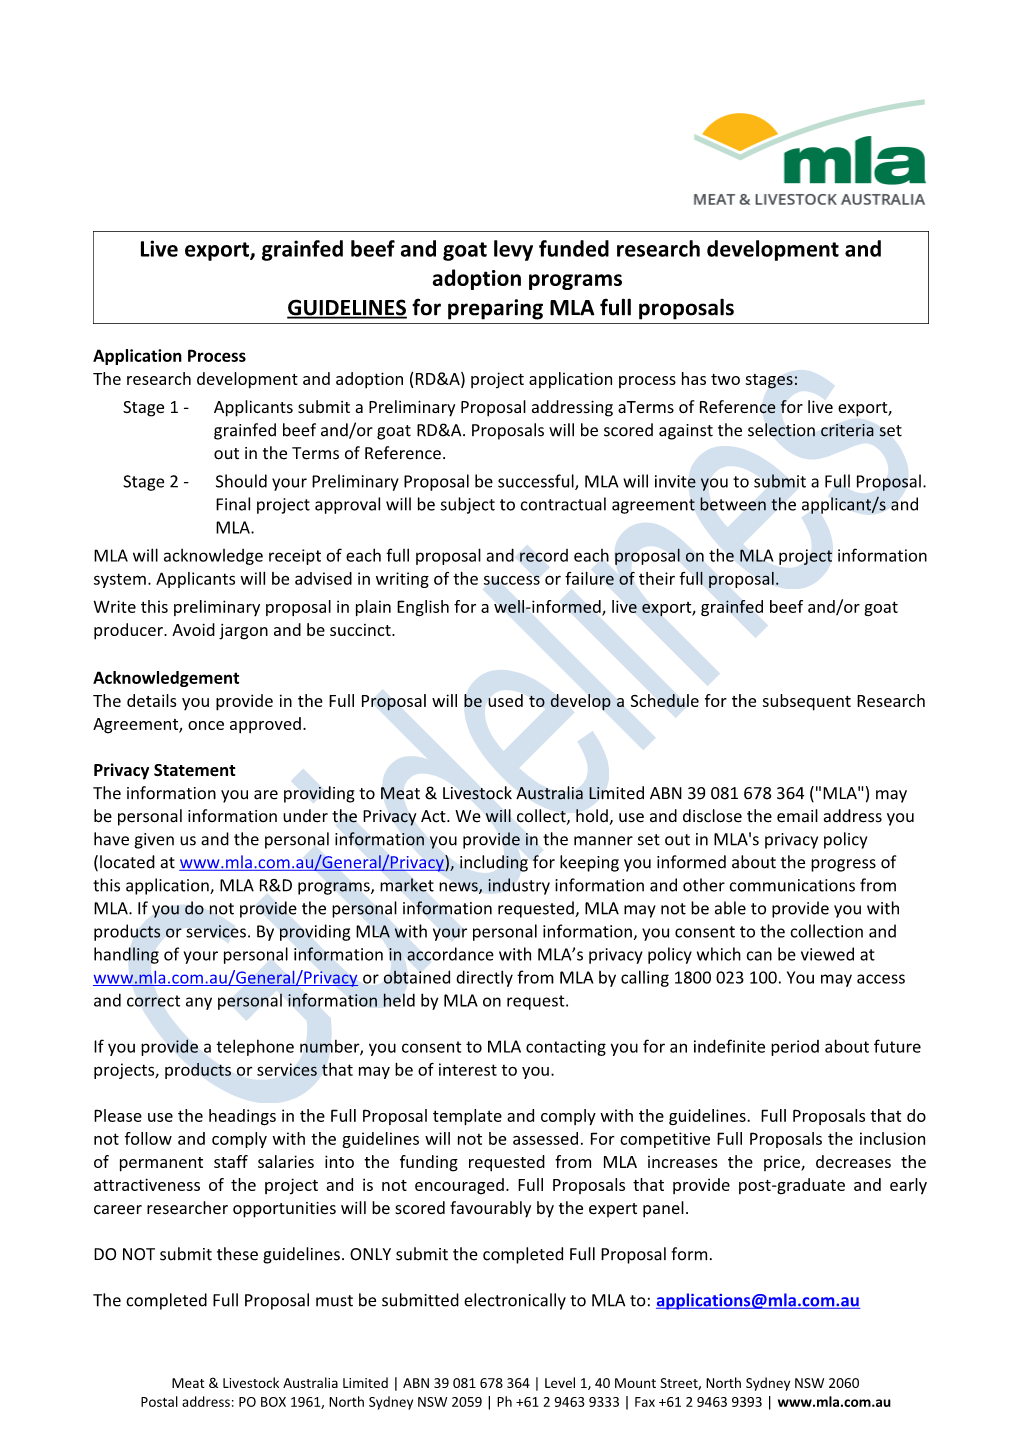 Full-Proposal-MLA-Guidelines Liveexport, Grainfed Beef and Goat Levy Funded Research Development